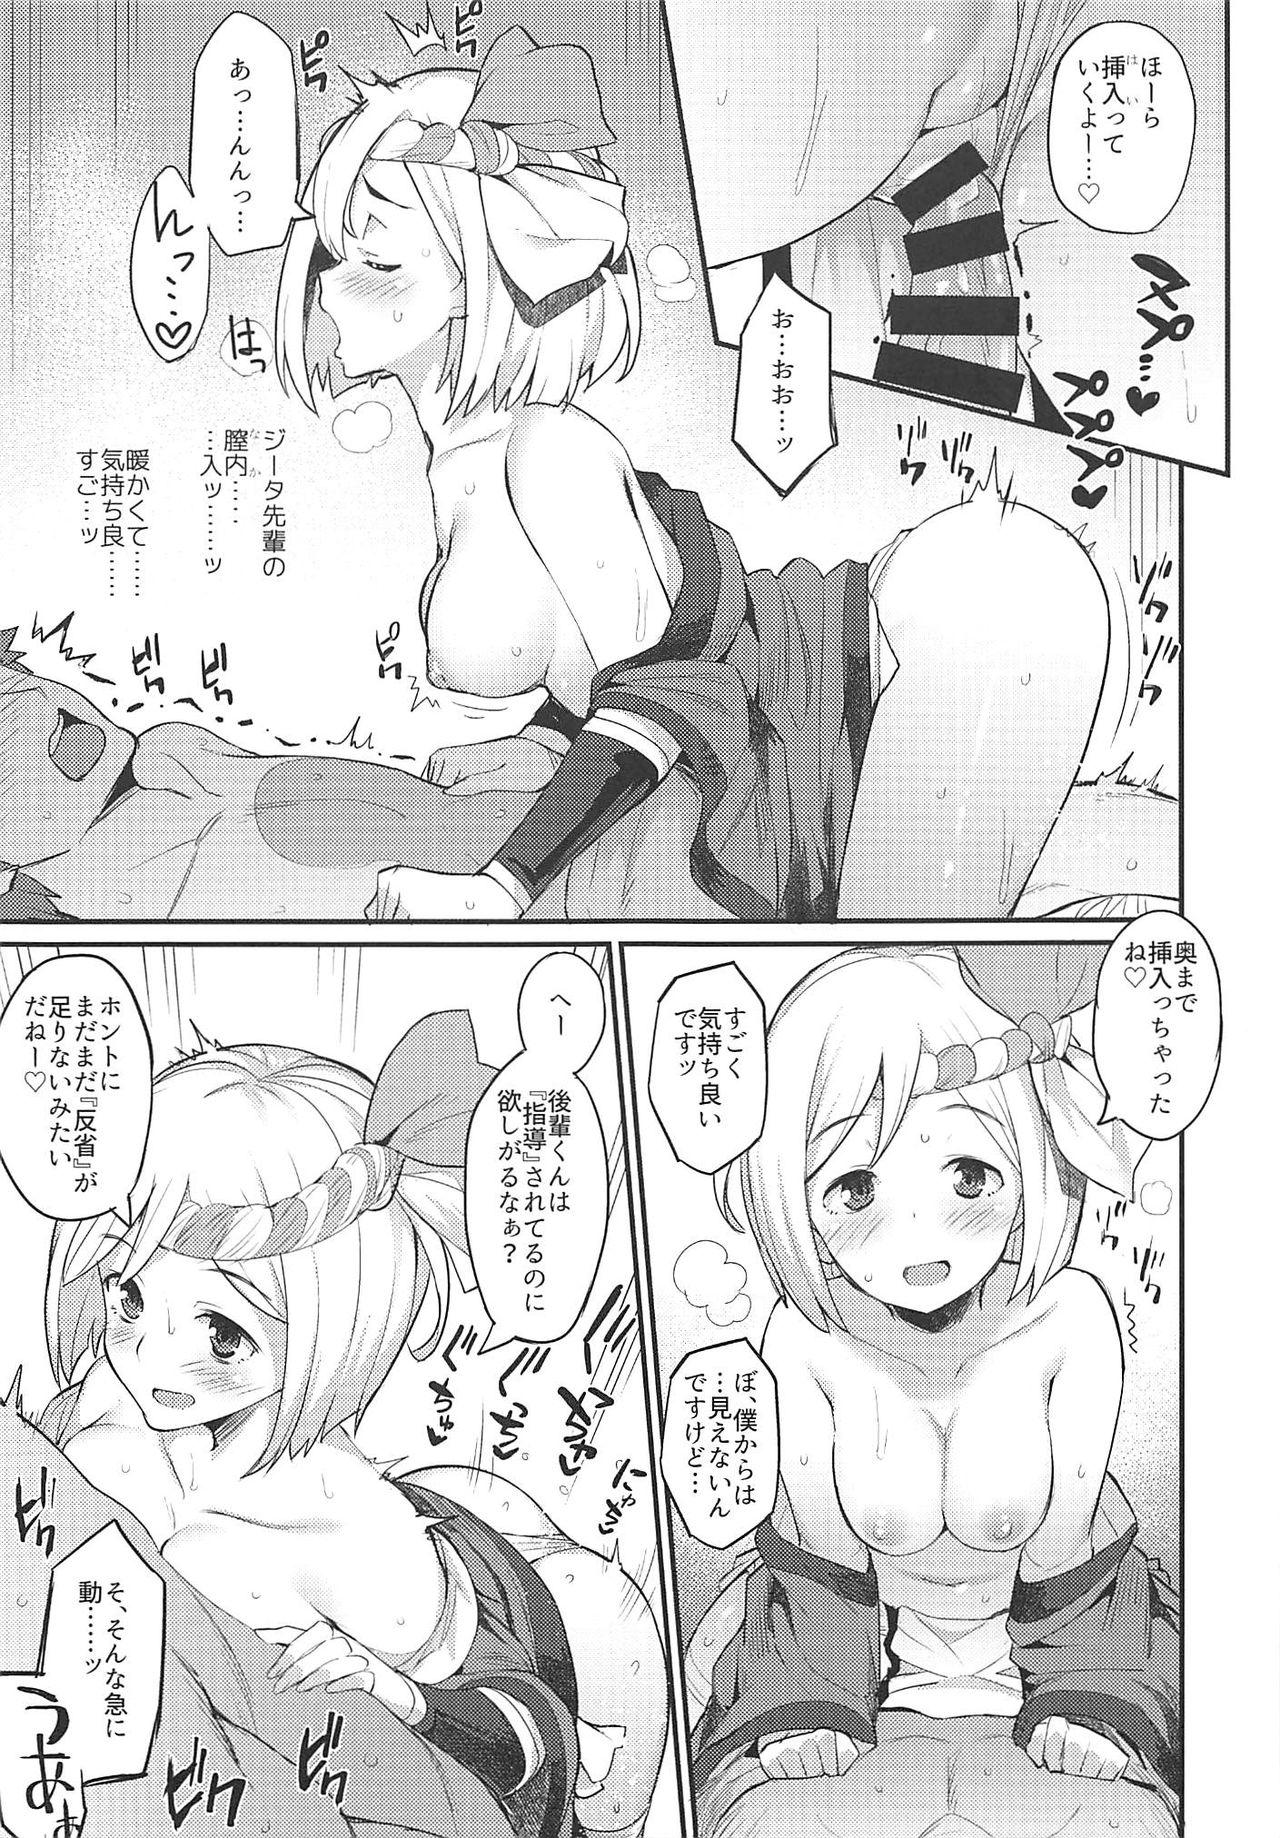 Family Roleplay Hameblue NEXT - Granblue fantasy Titties - Page 8